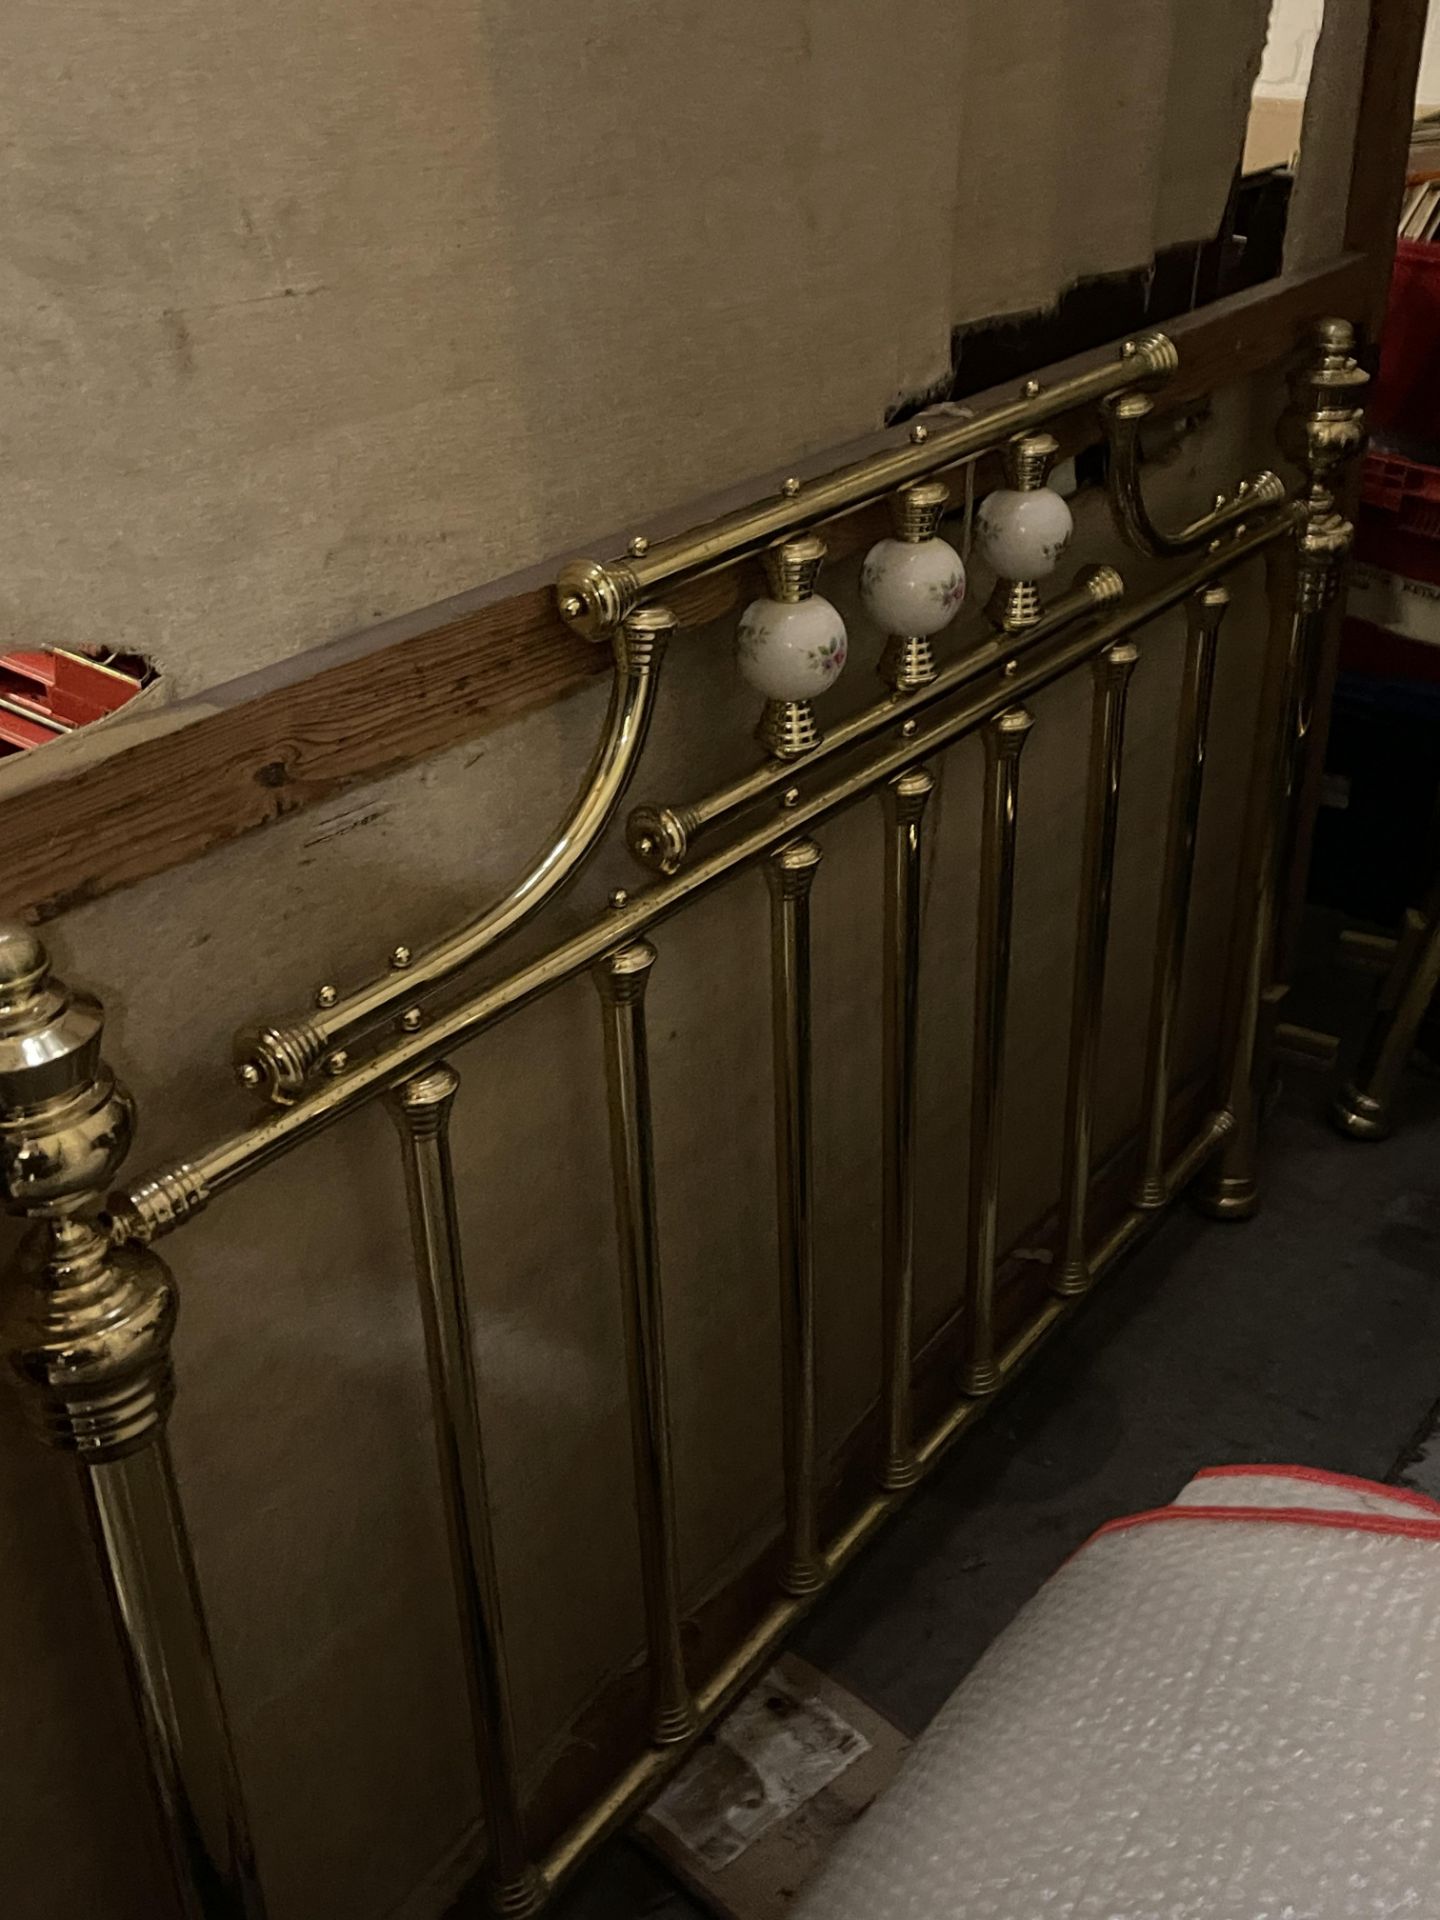 Brass double bed frame very old unclaimed property - Image 6 of 8